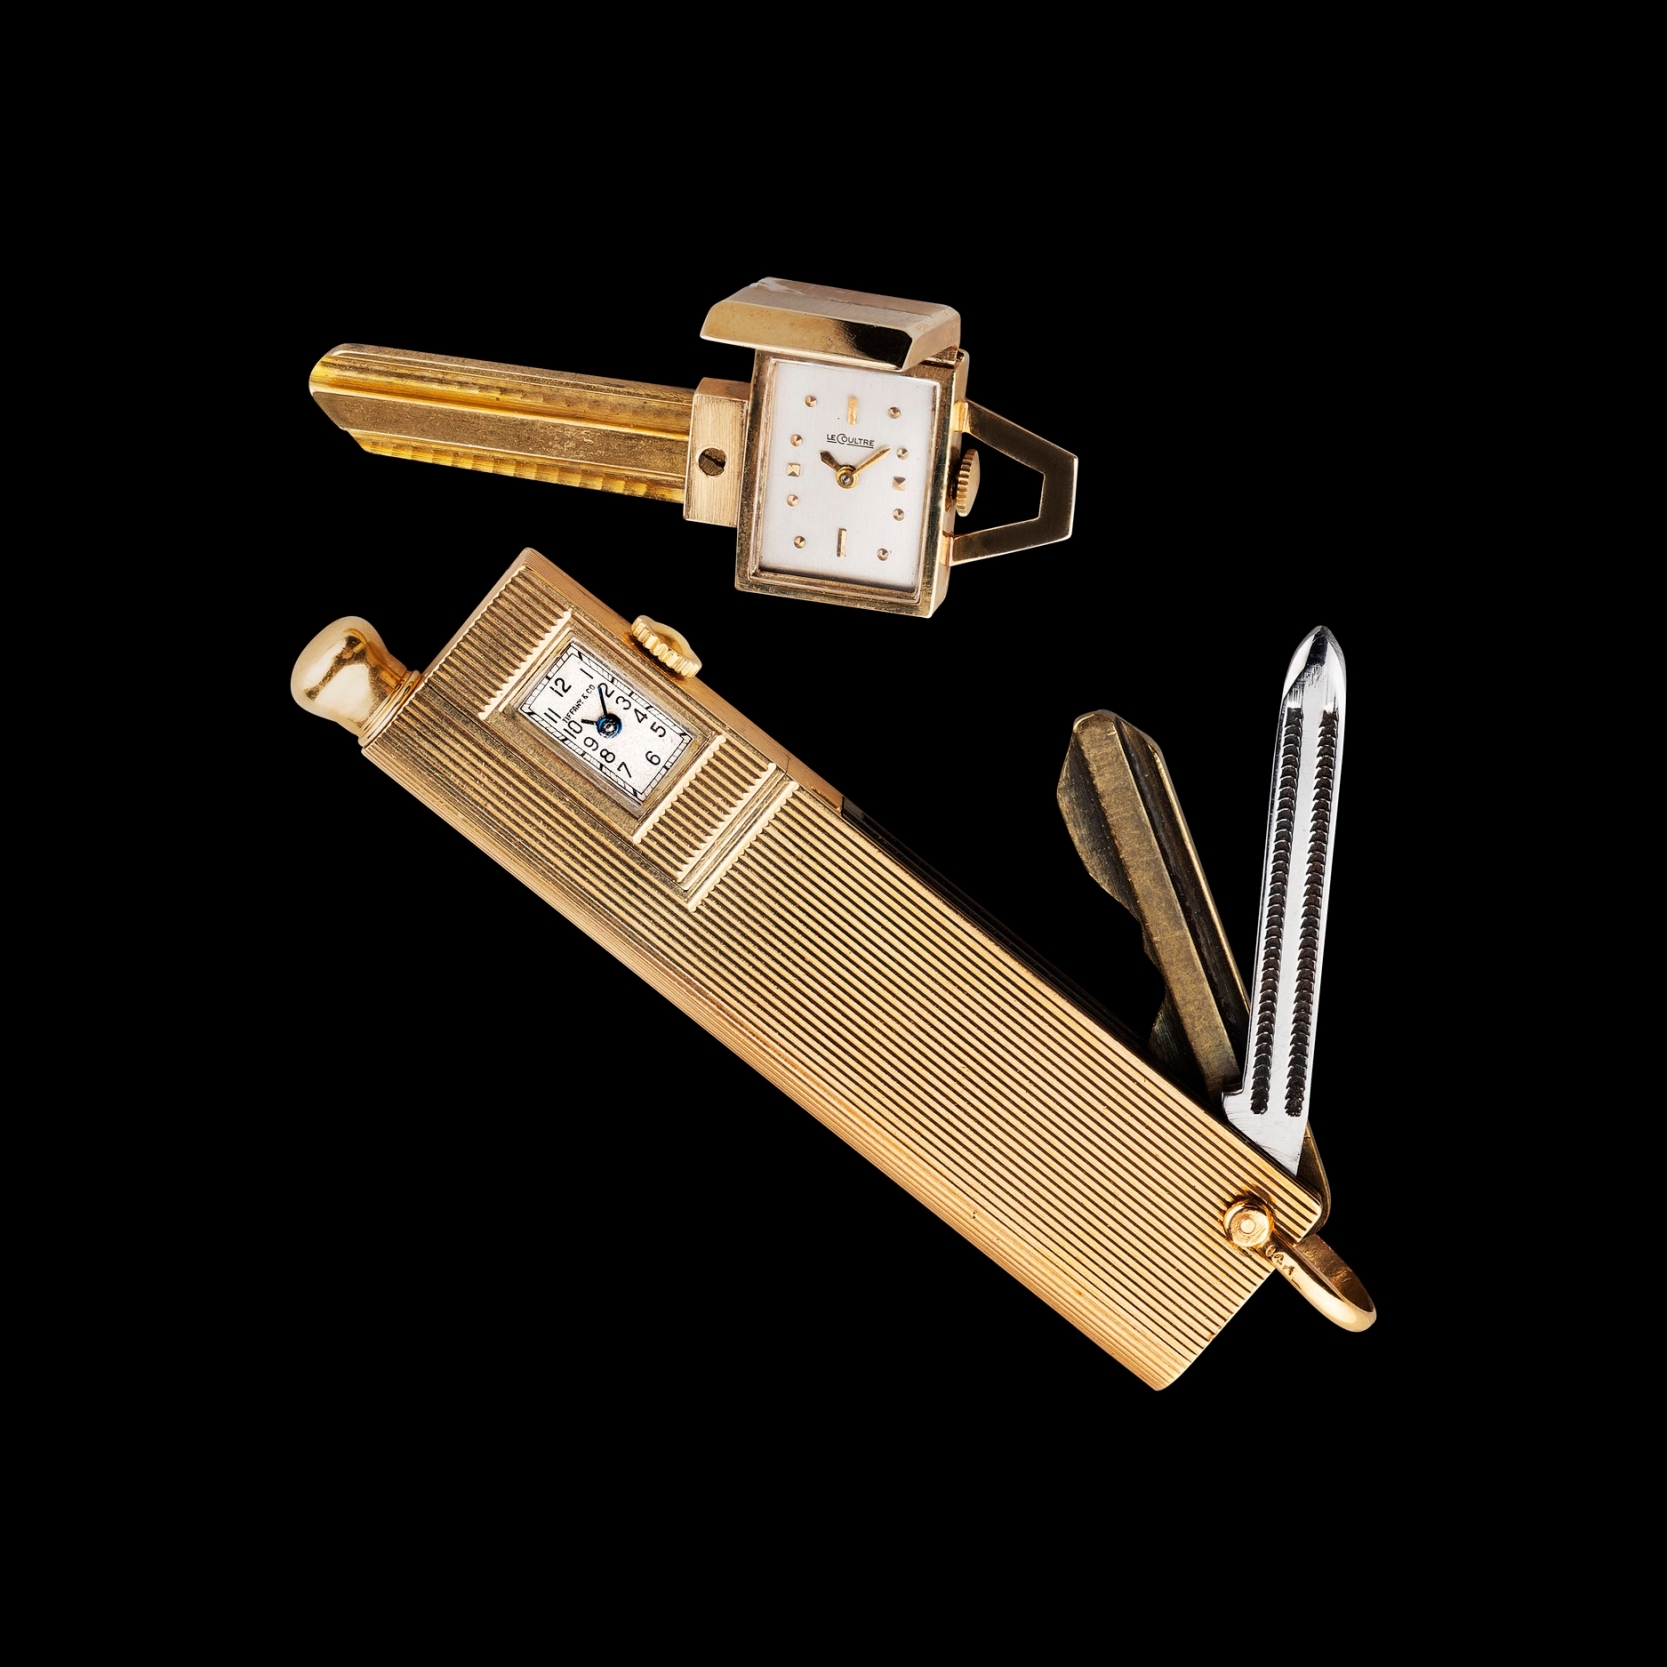 Two key watches by Jaeger-LeCoultre